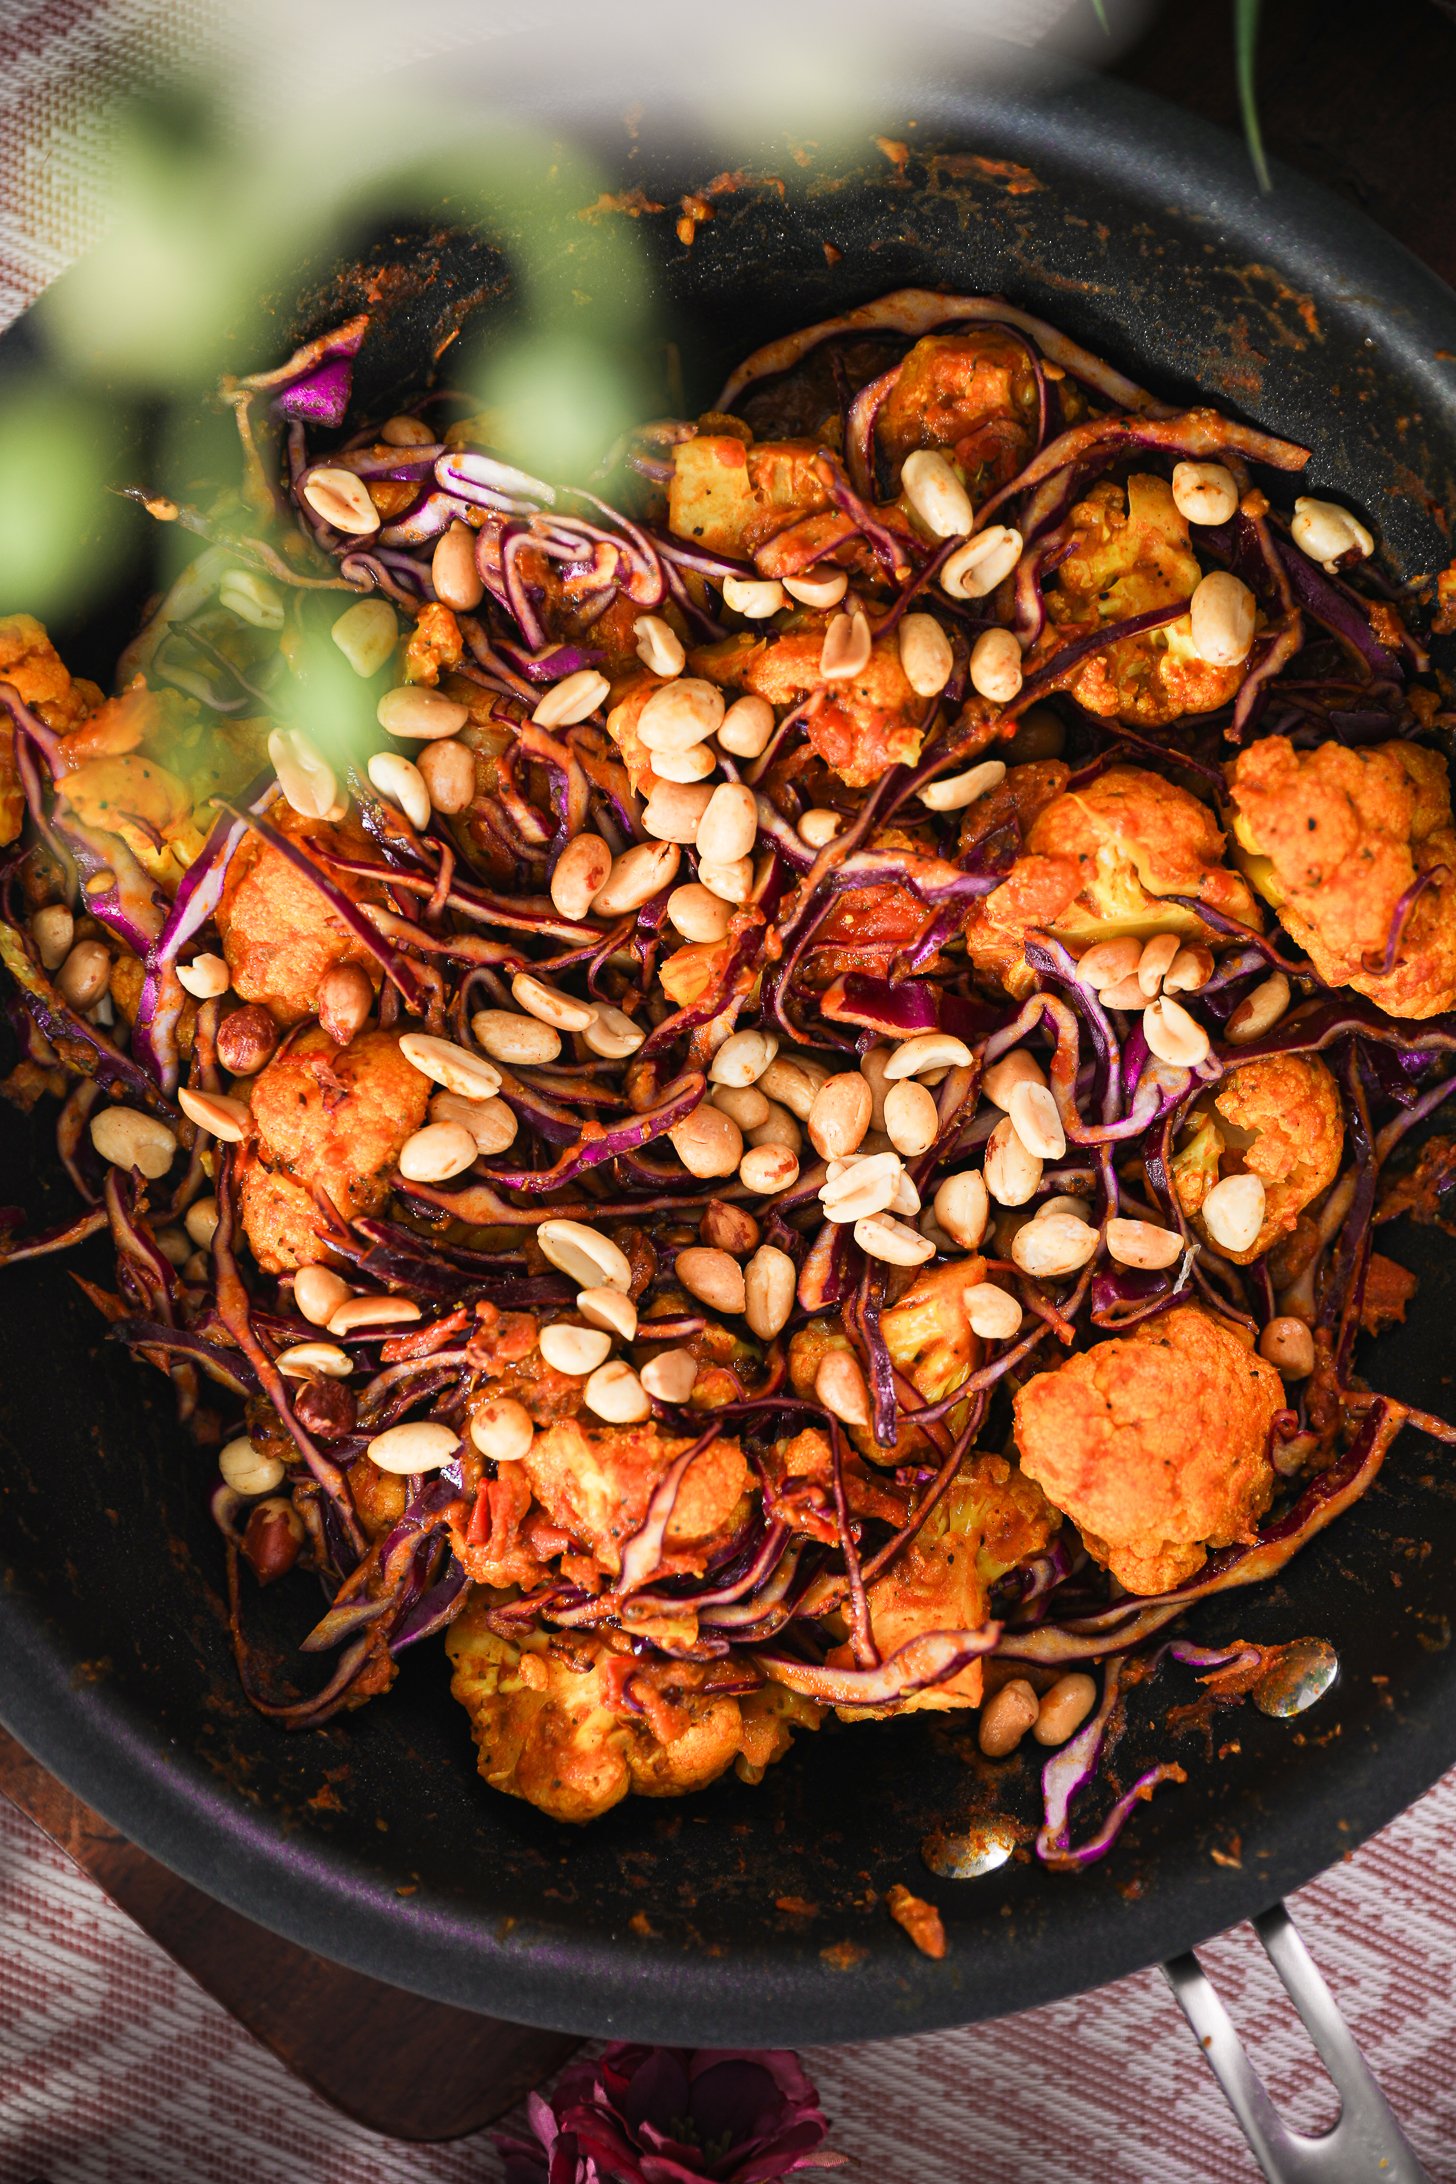 Close-up image of pan of stir fired cabbage and cauliflower topped with peanuts.